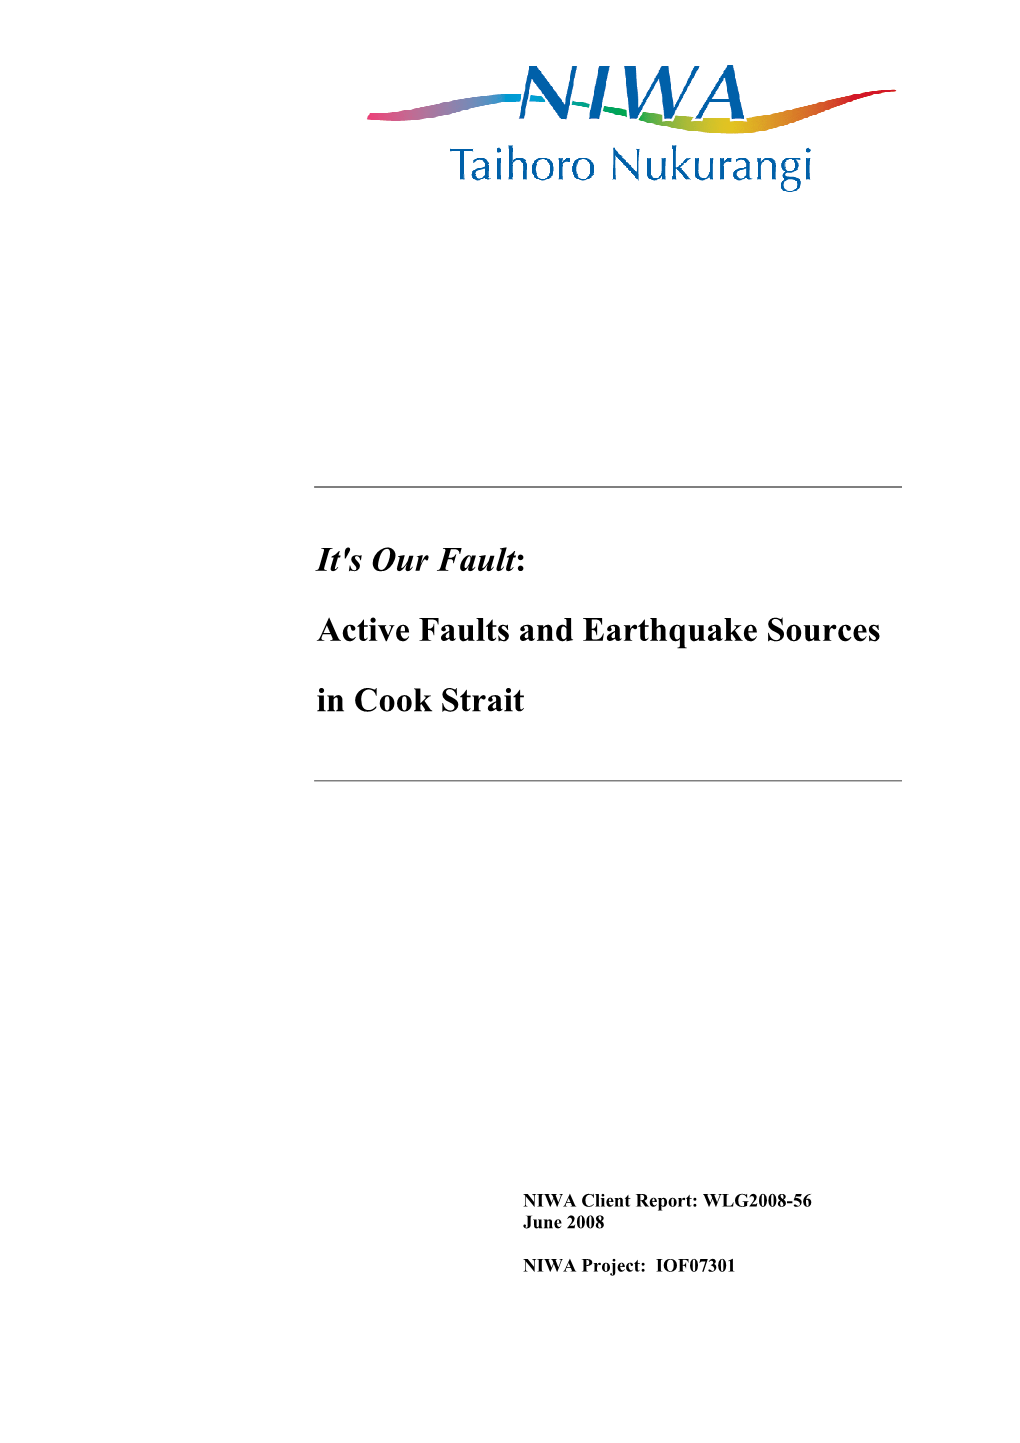 Active Faults and Earthquake Sources in Cook Strait